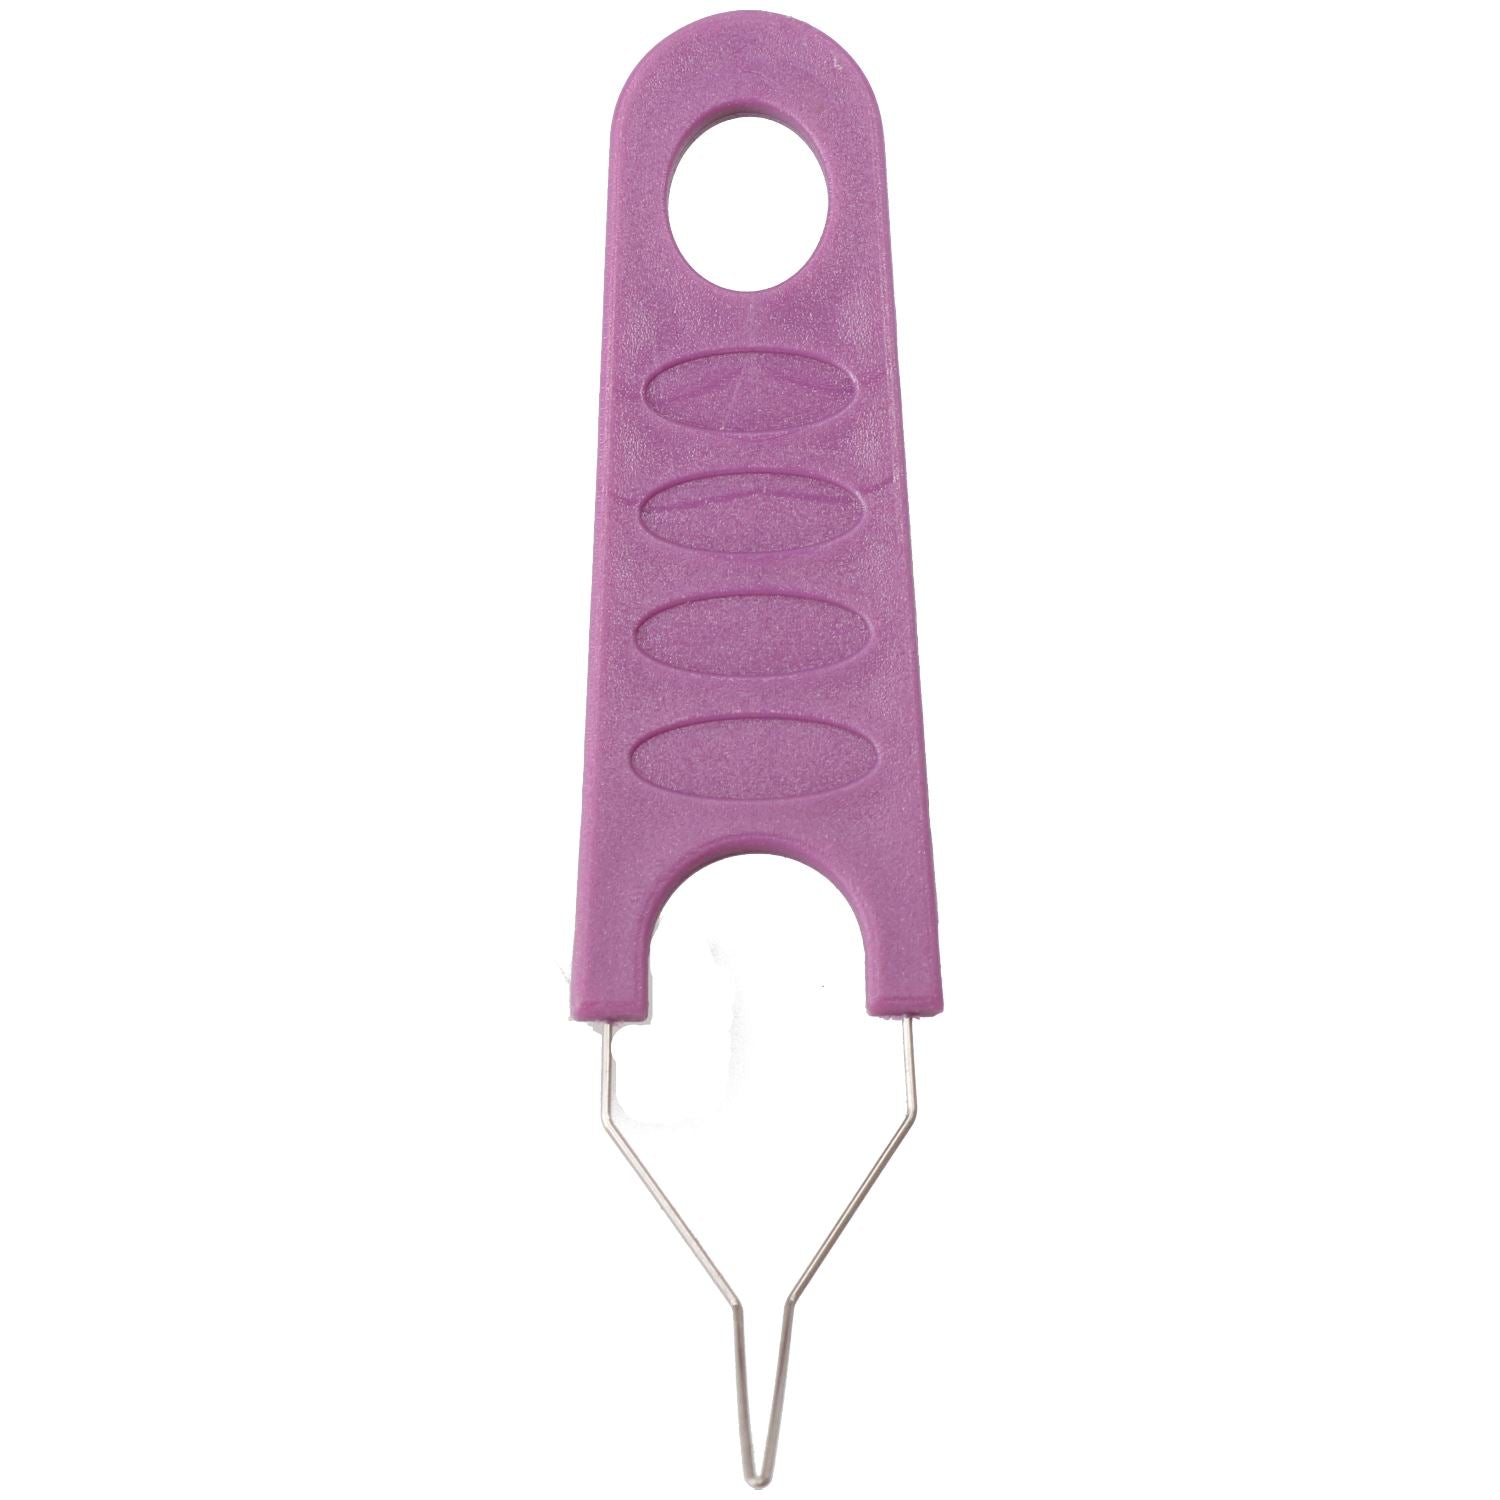 Veterinary Approved Tick Remover Tool For All Tick Sizes For Dogs Cats Pets